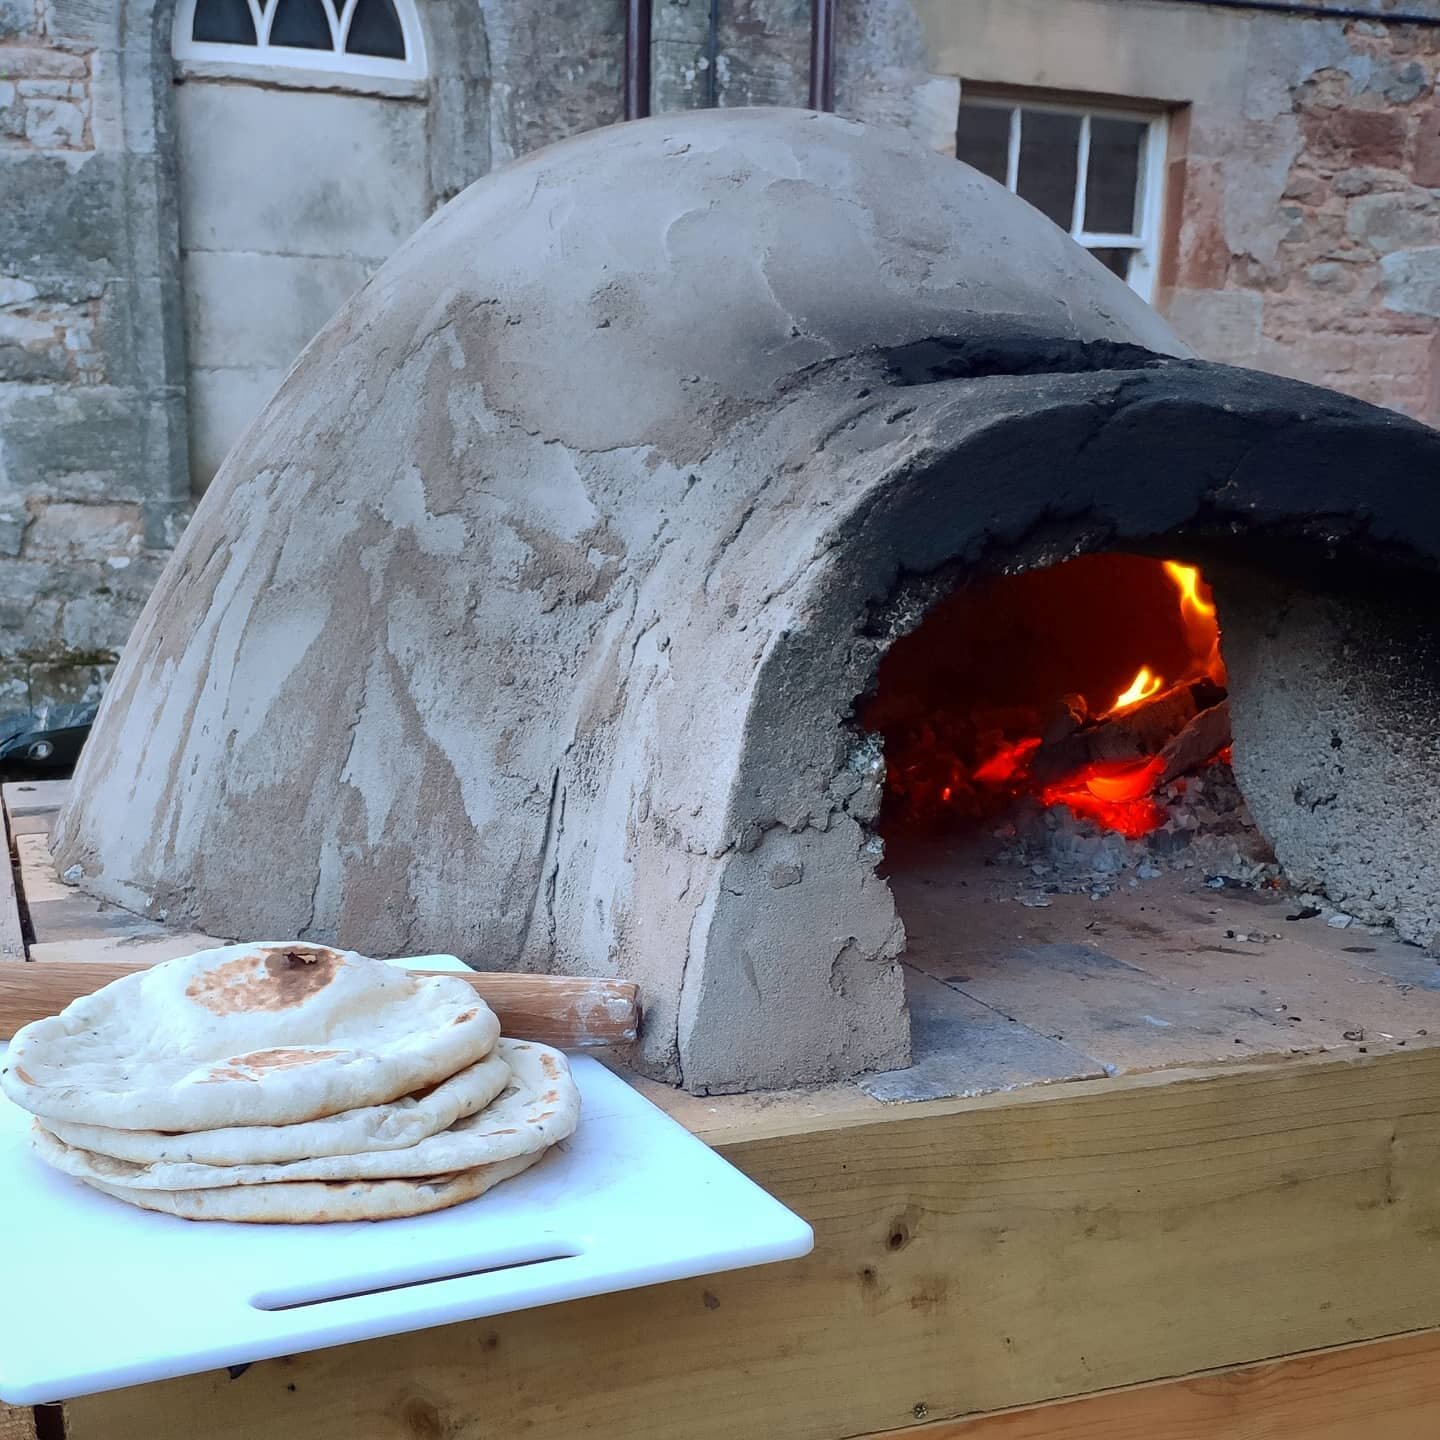 I really did enjoy getting the pizza oven up and running for just 15 minutes of actually cooking some naan breads. I find it's easy to feel like it's too much effort to light sometimes and have thought about getting an @oonihq to fill the gaps when I